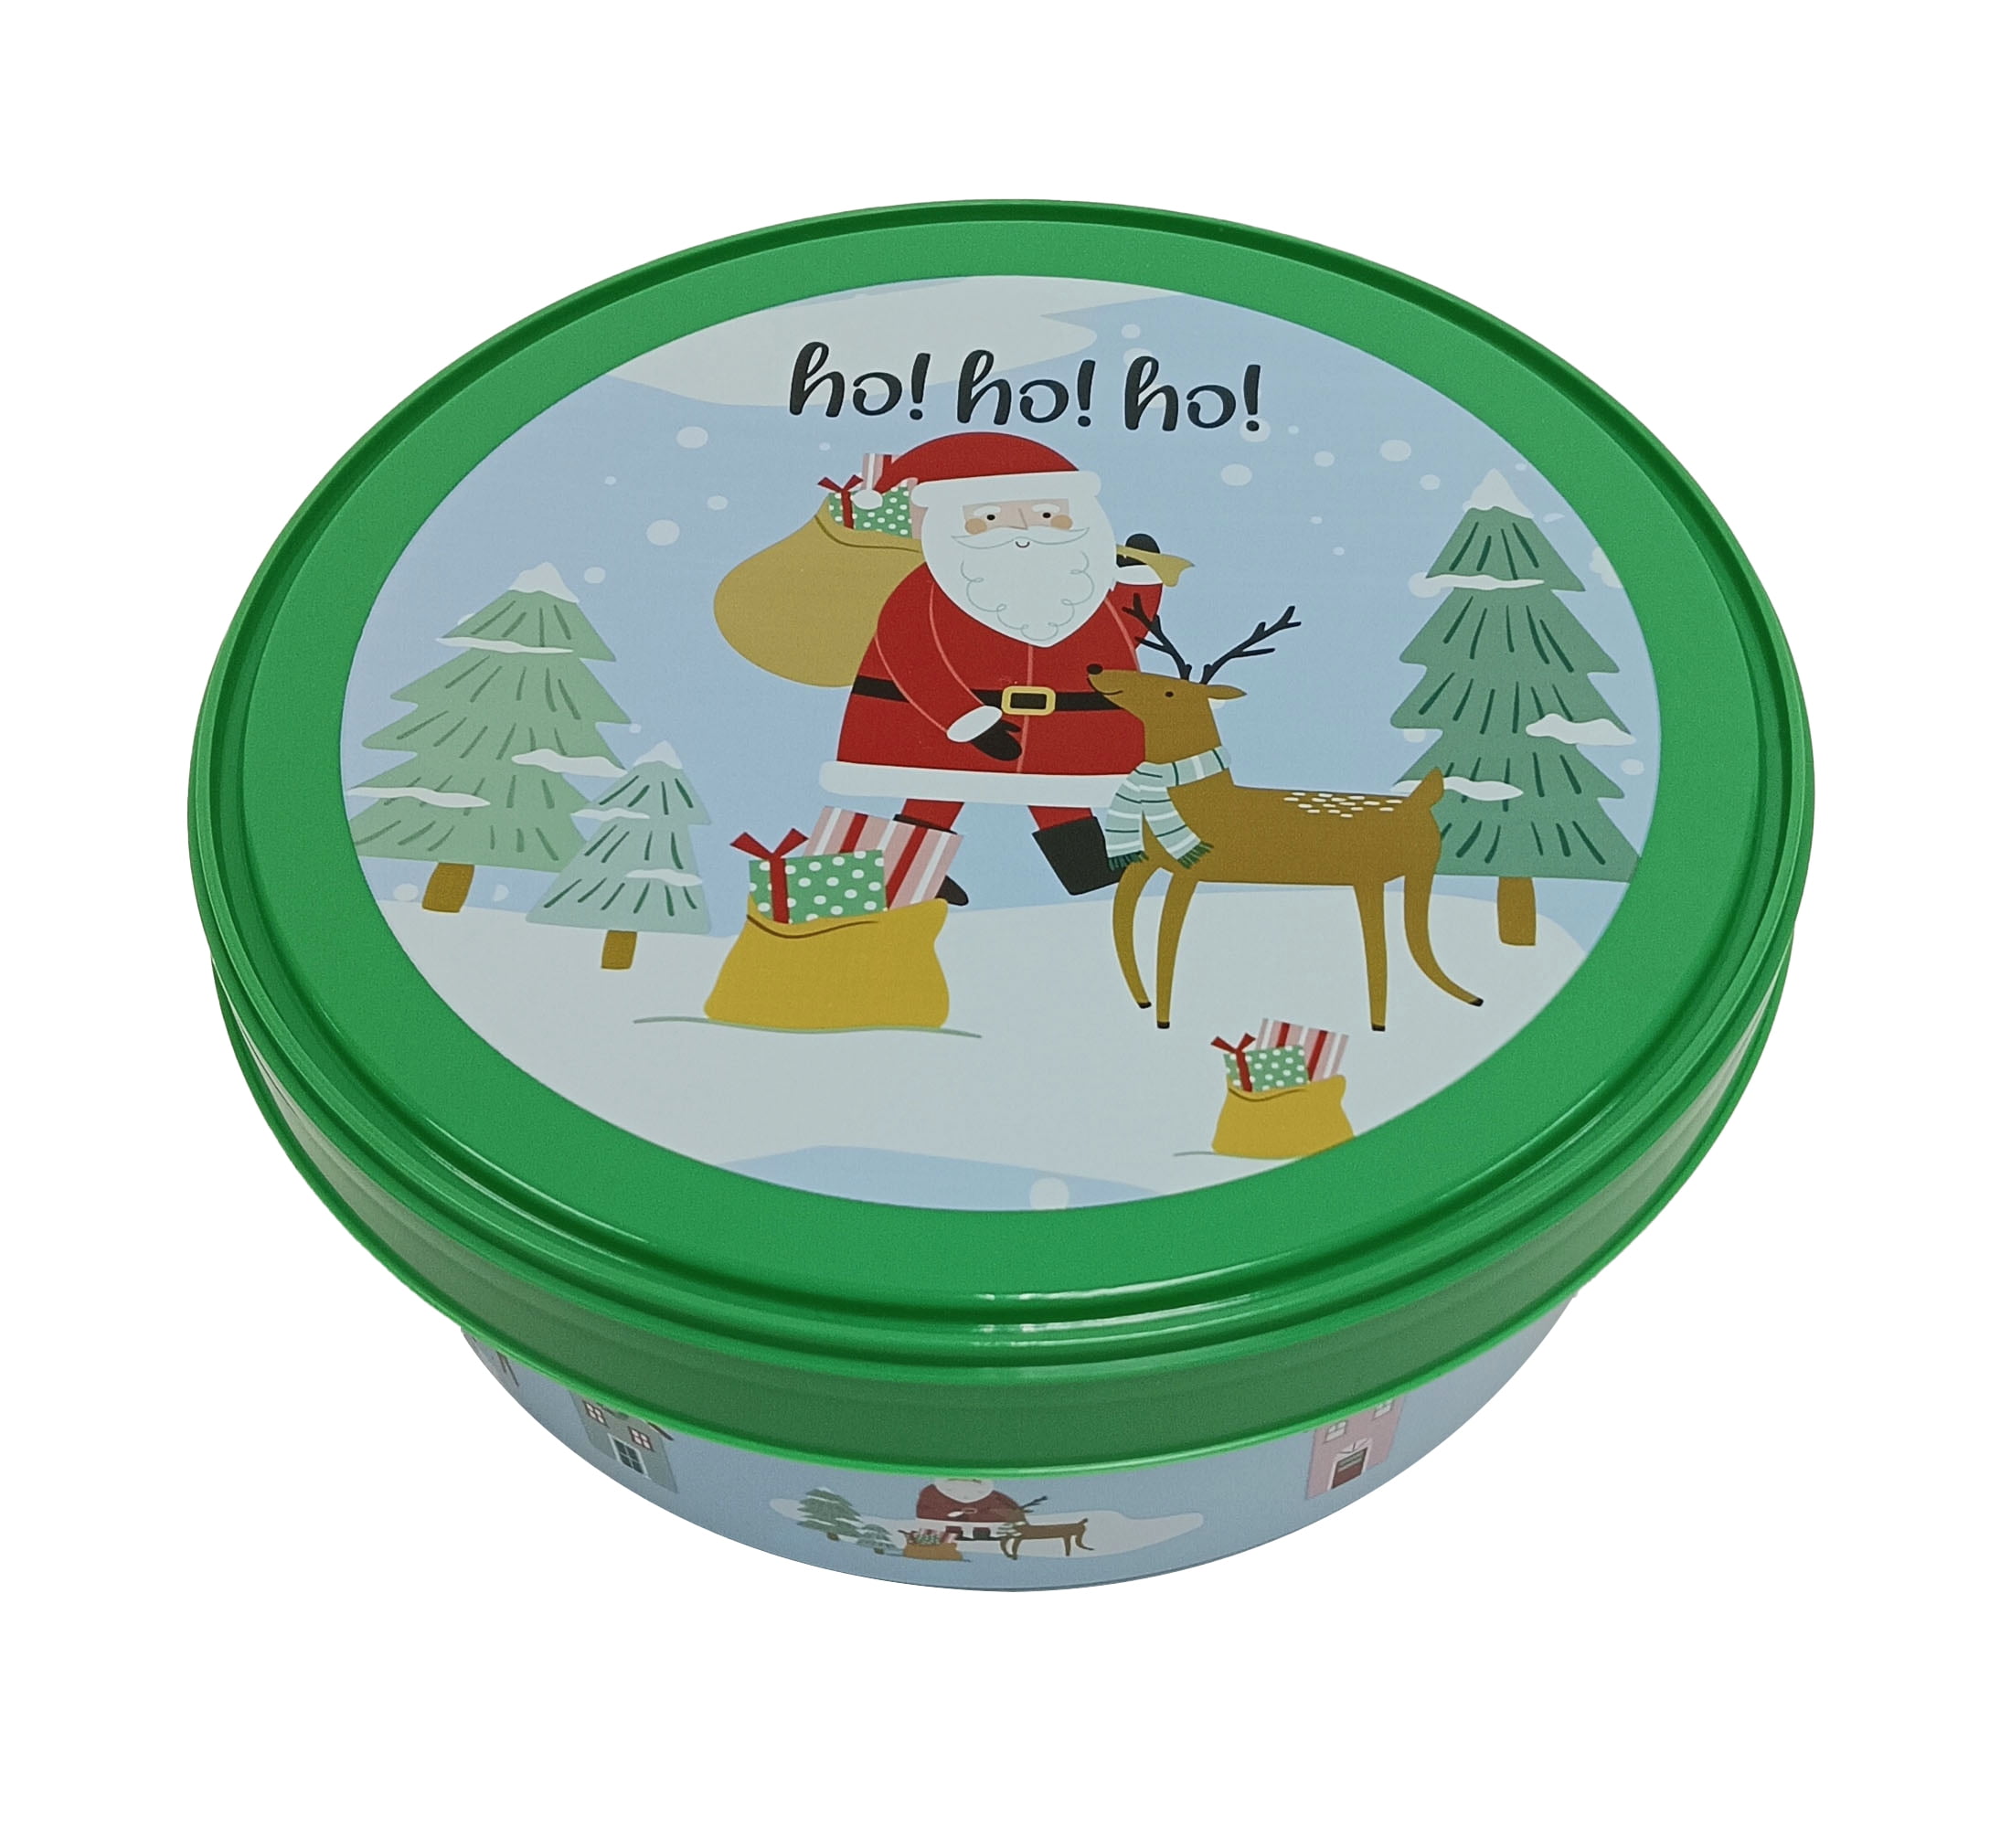 Round Christmas Containers Plastic Food Storage with Lids Joy to